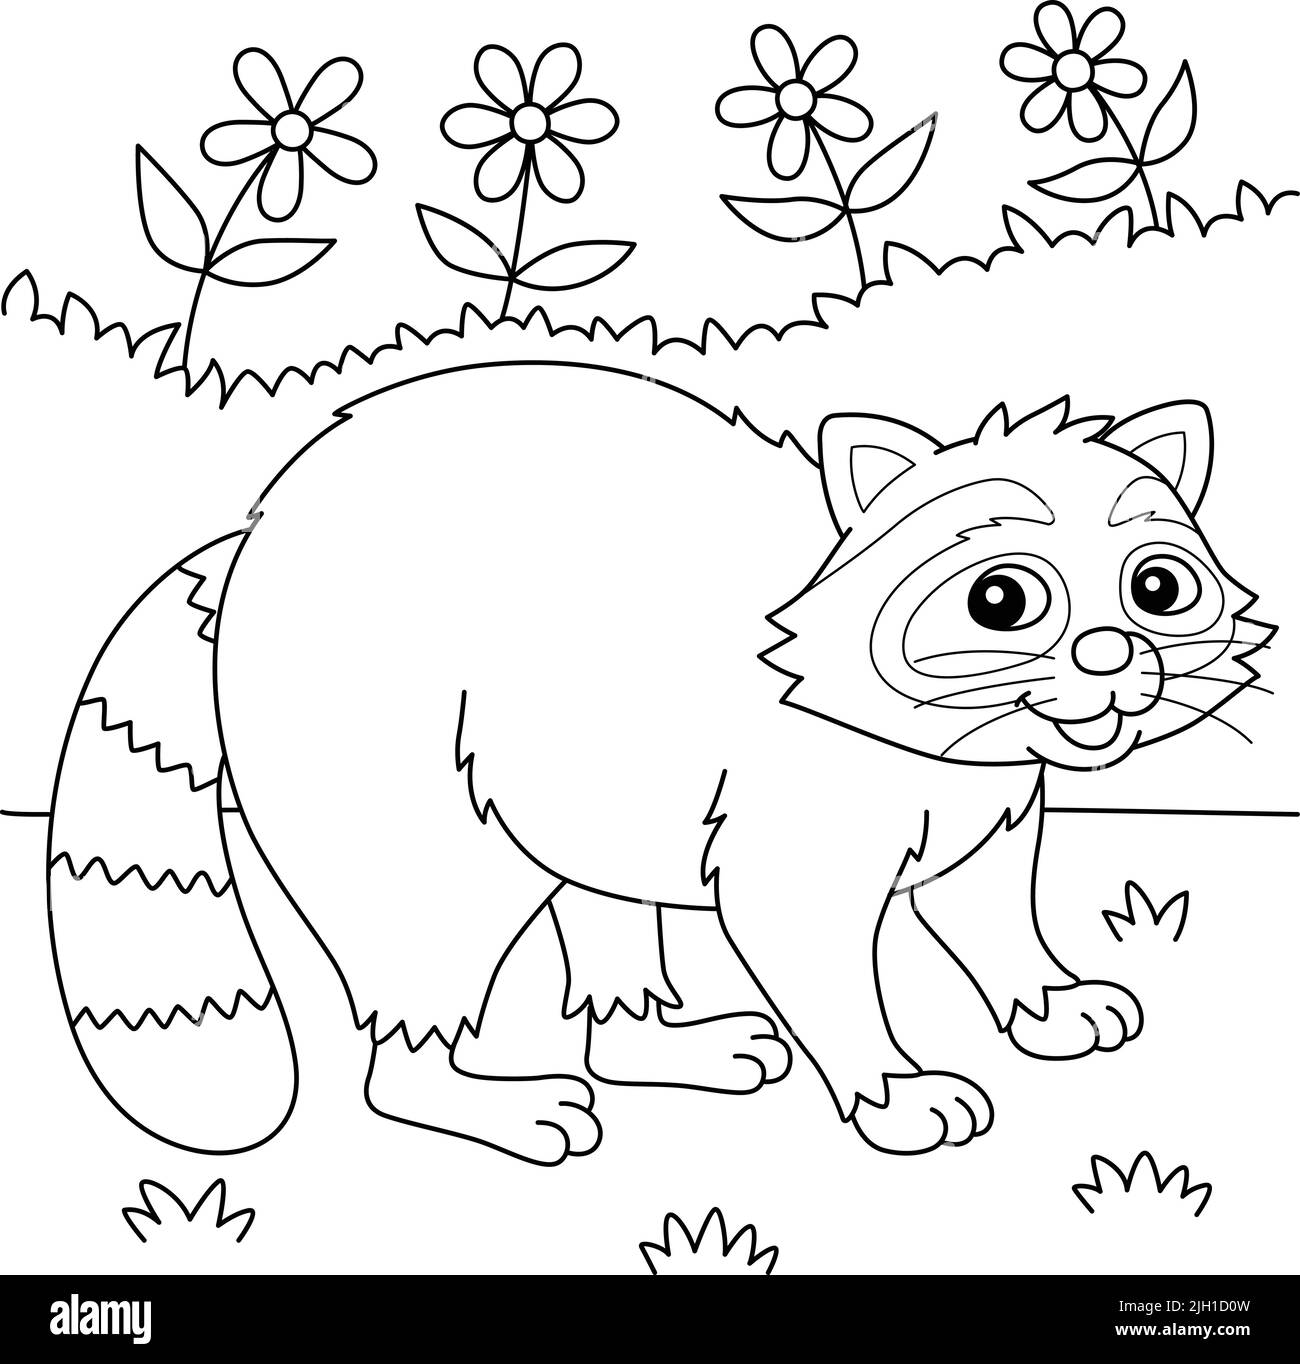 Racoon Animal Coloring Page for Kids Stock Vector